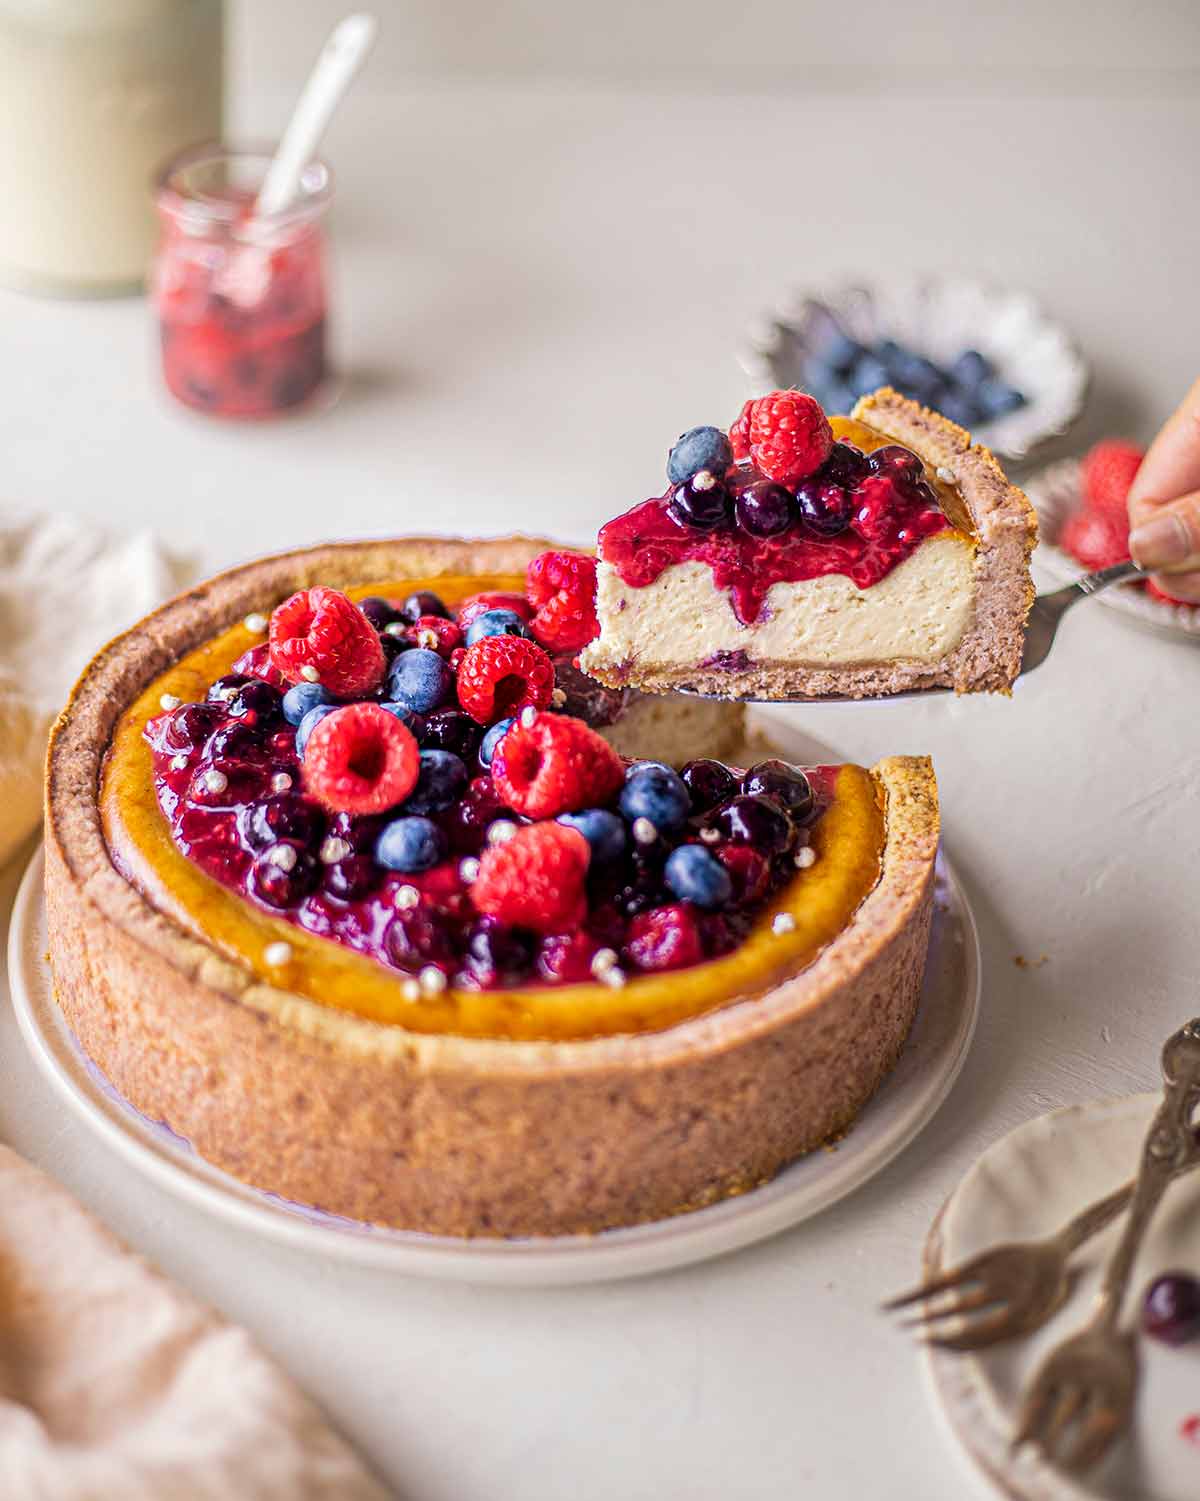 Baked cheesecake (vegan) topped with berries with slice lifted out by cake server.